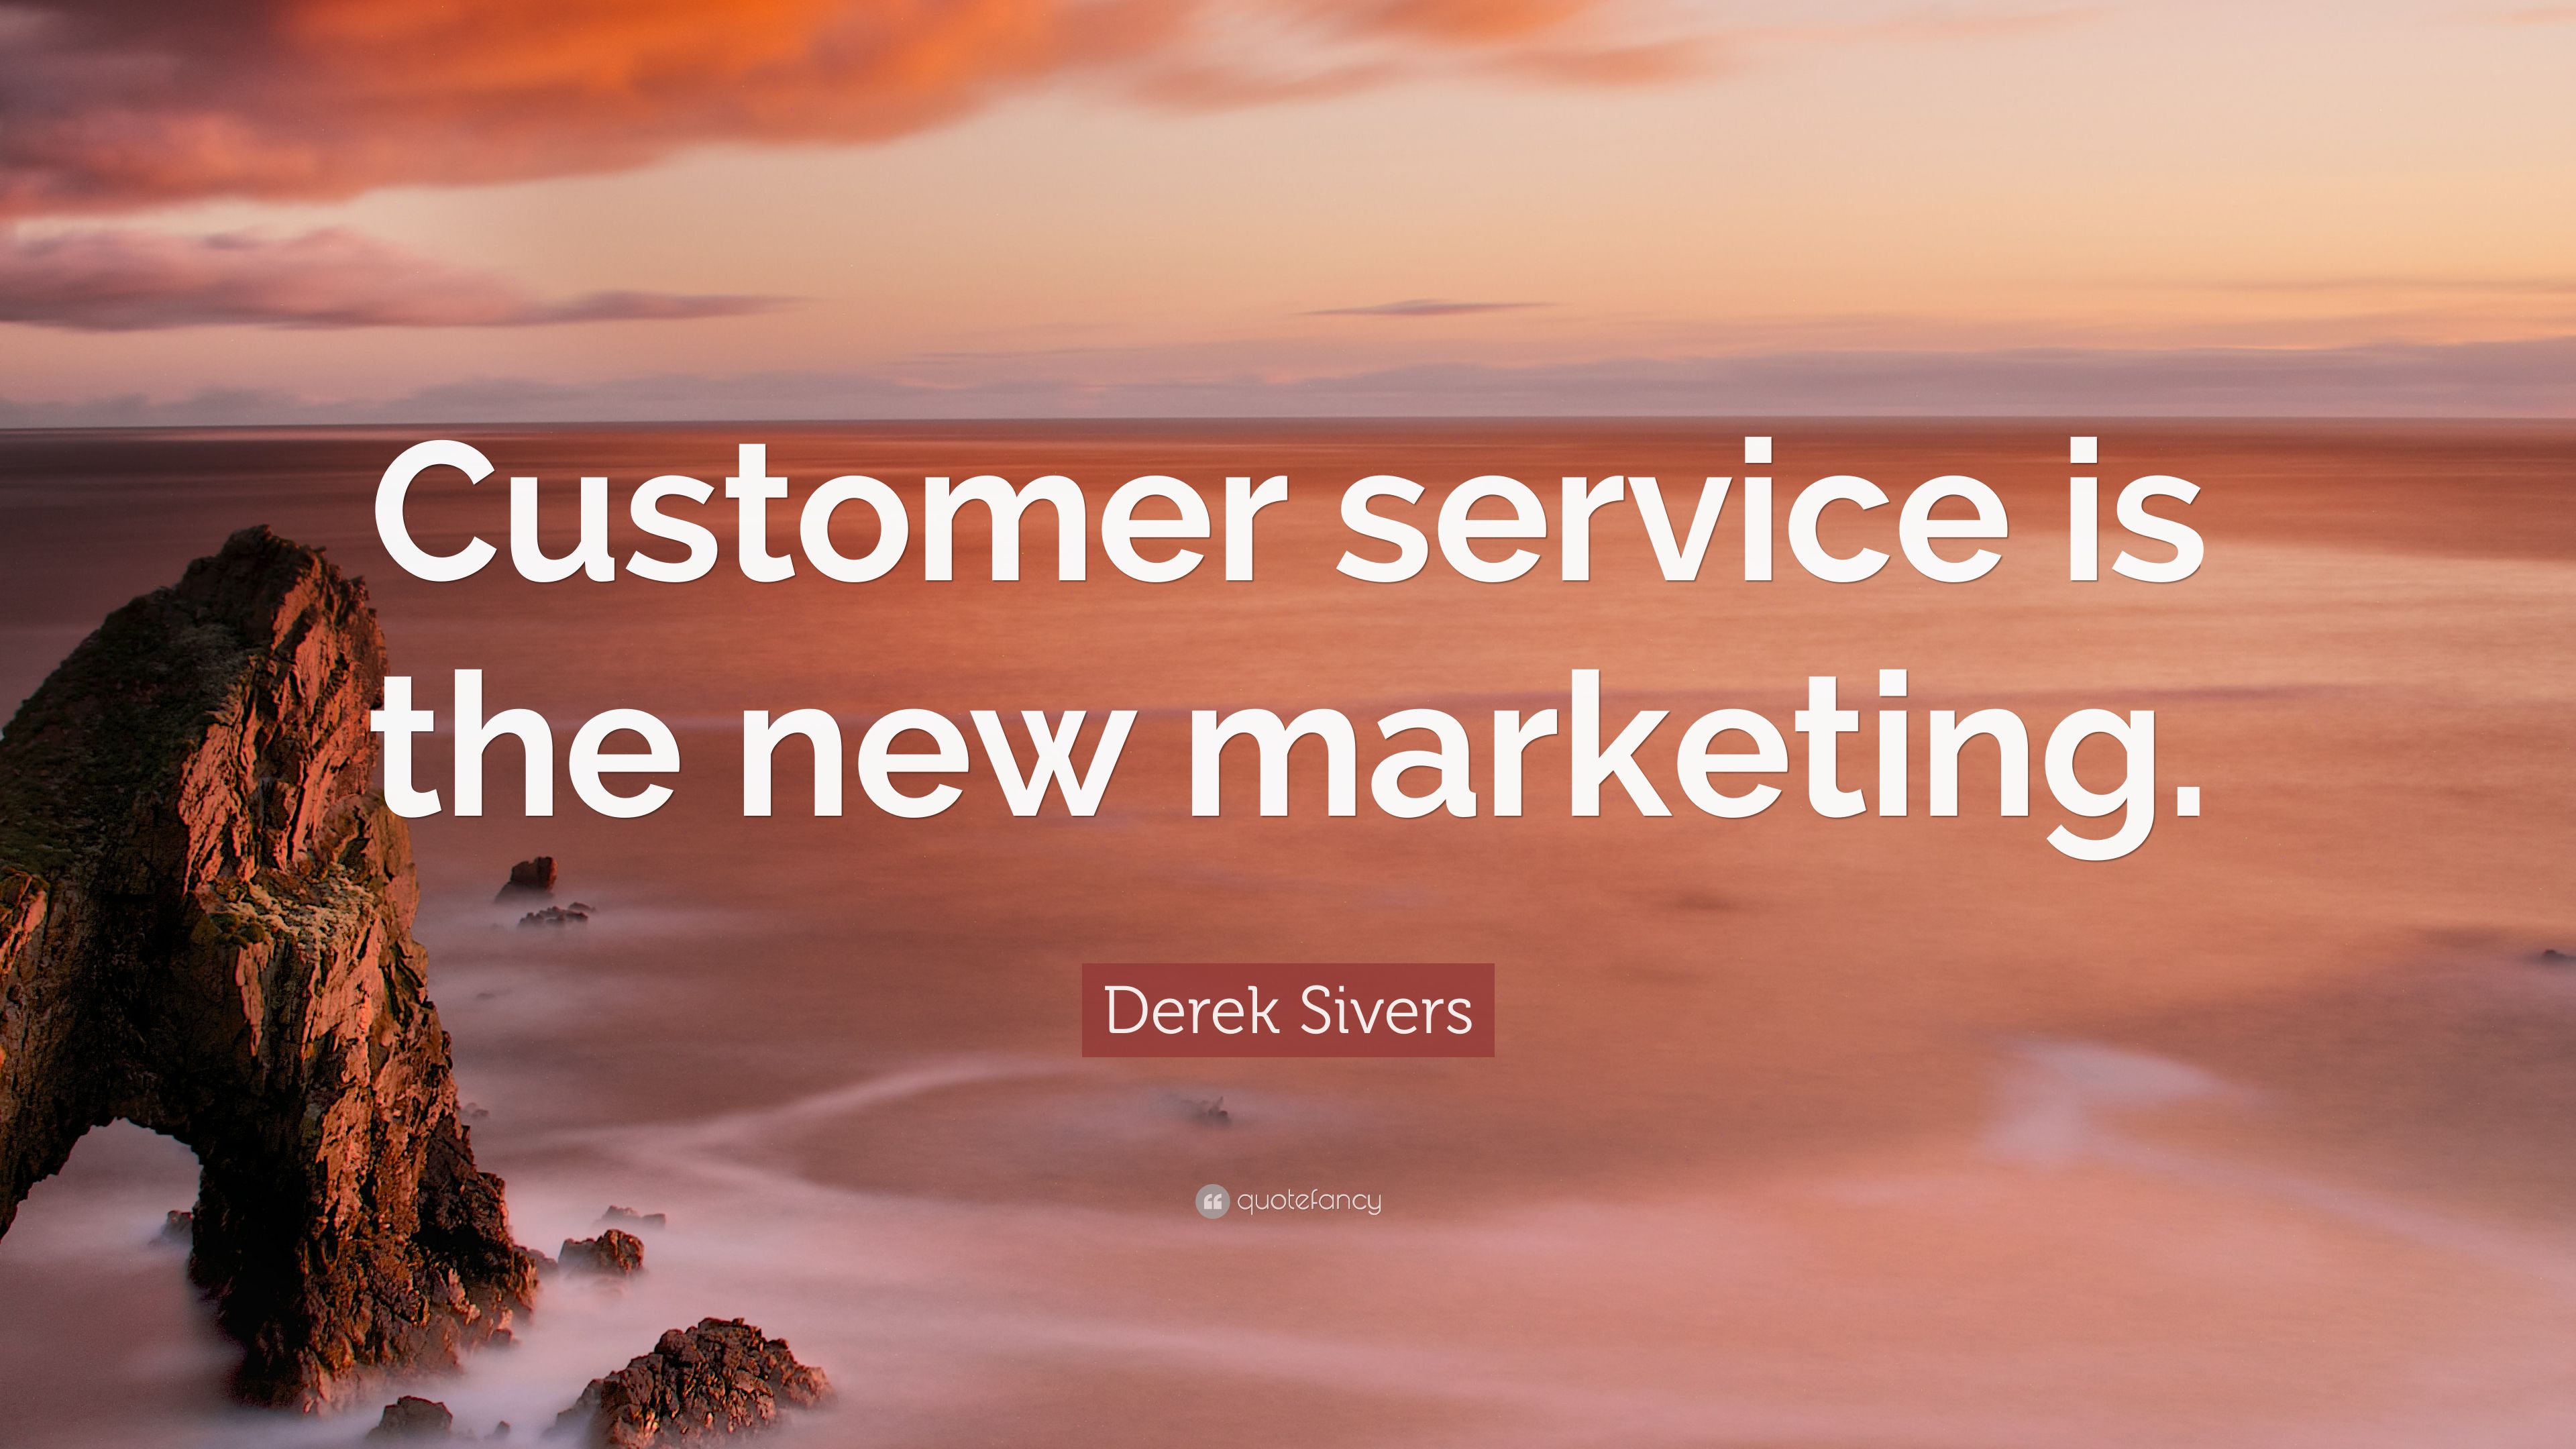 Derek Sivers Quote: “Customer service is the new marketing.” 9